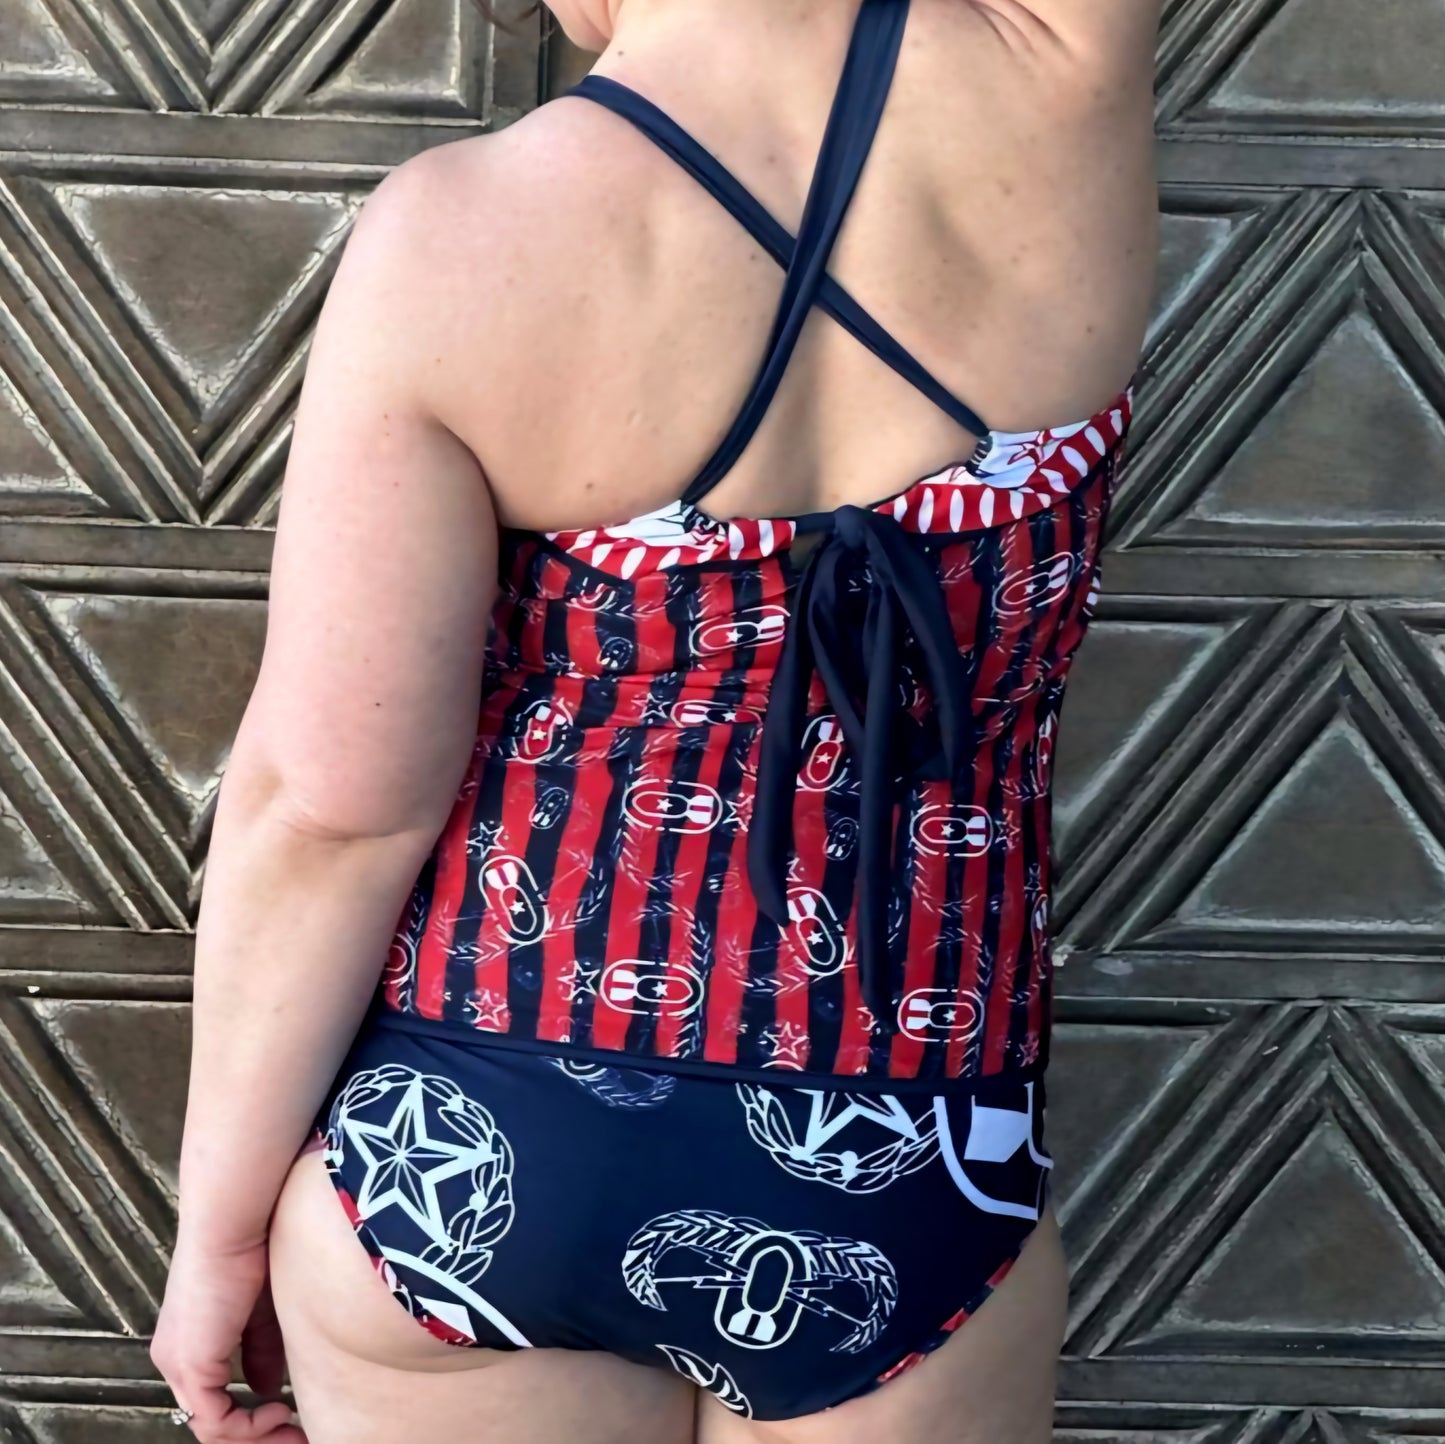 EOD Stars and Stripes Reversible Two Piece Tankini Swimsuit (Red, White, and Blue)